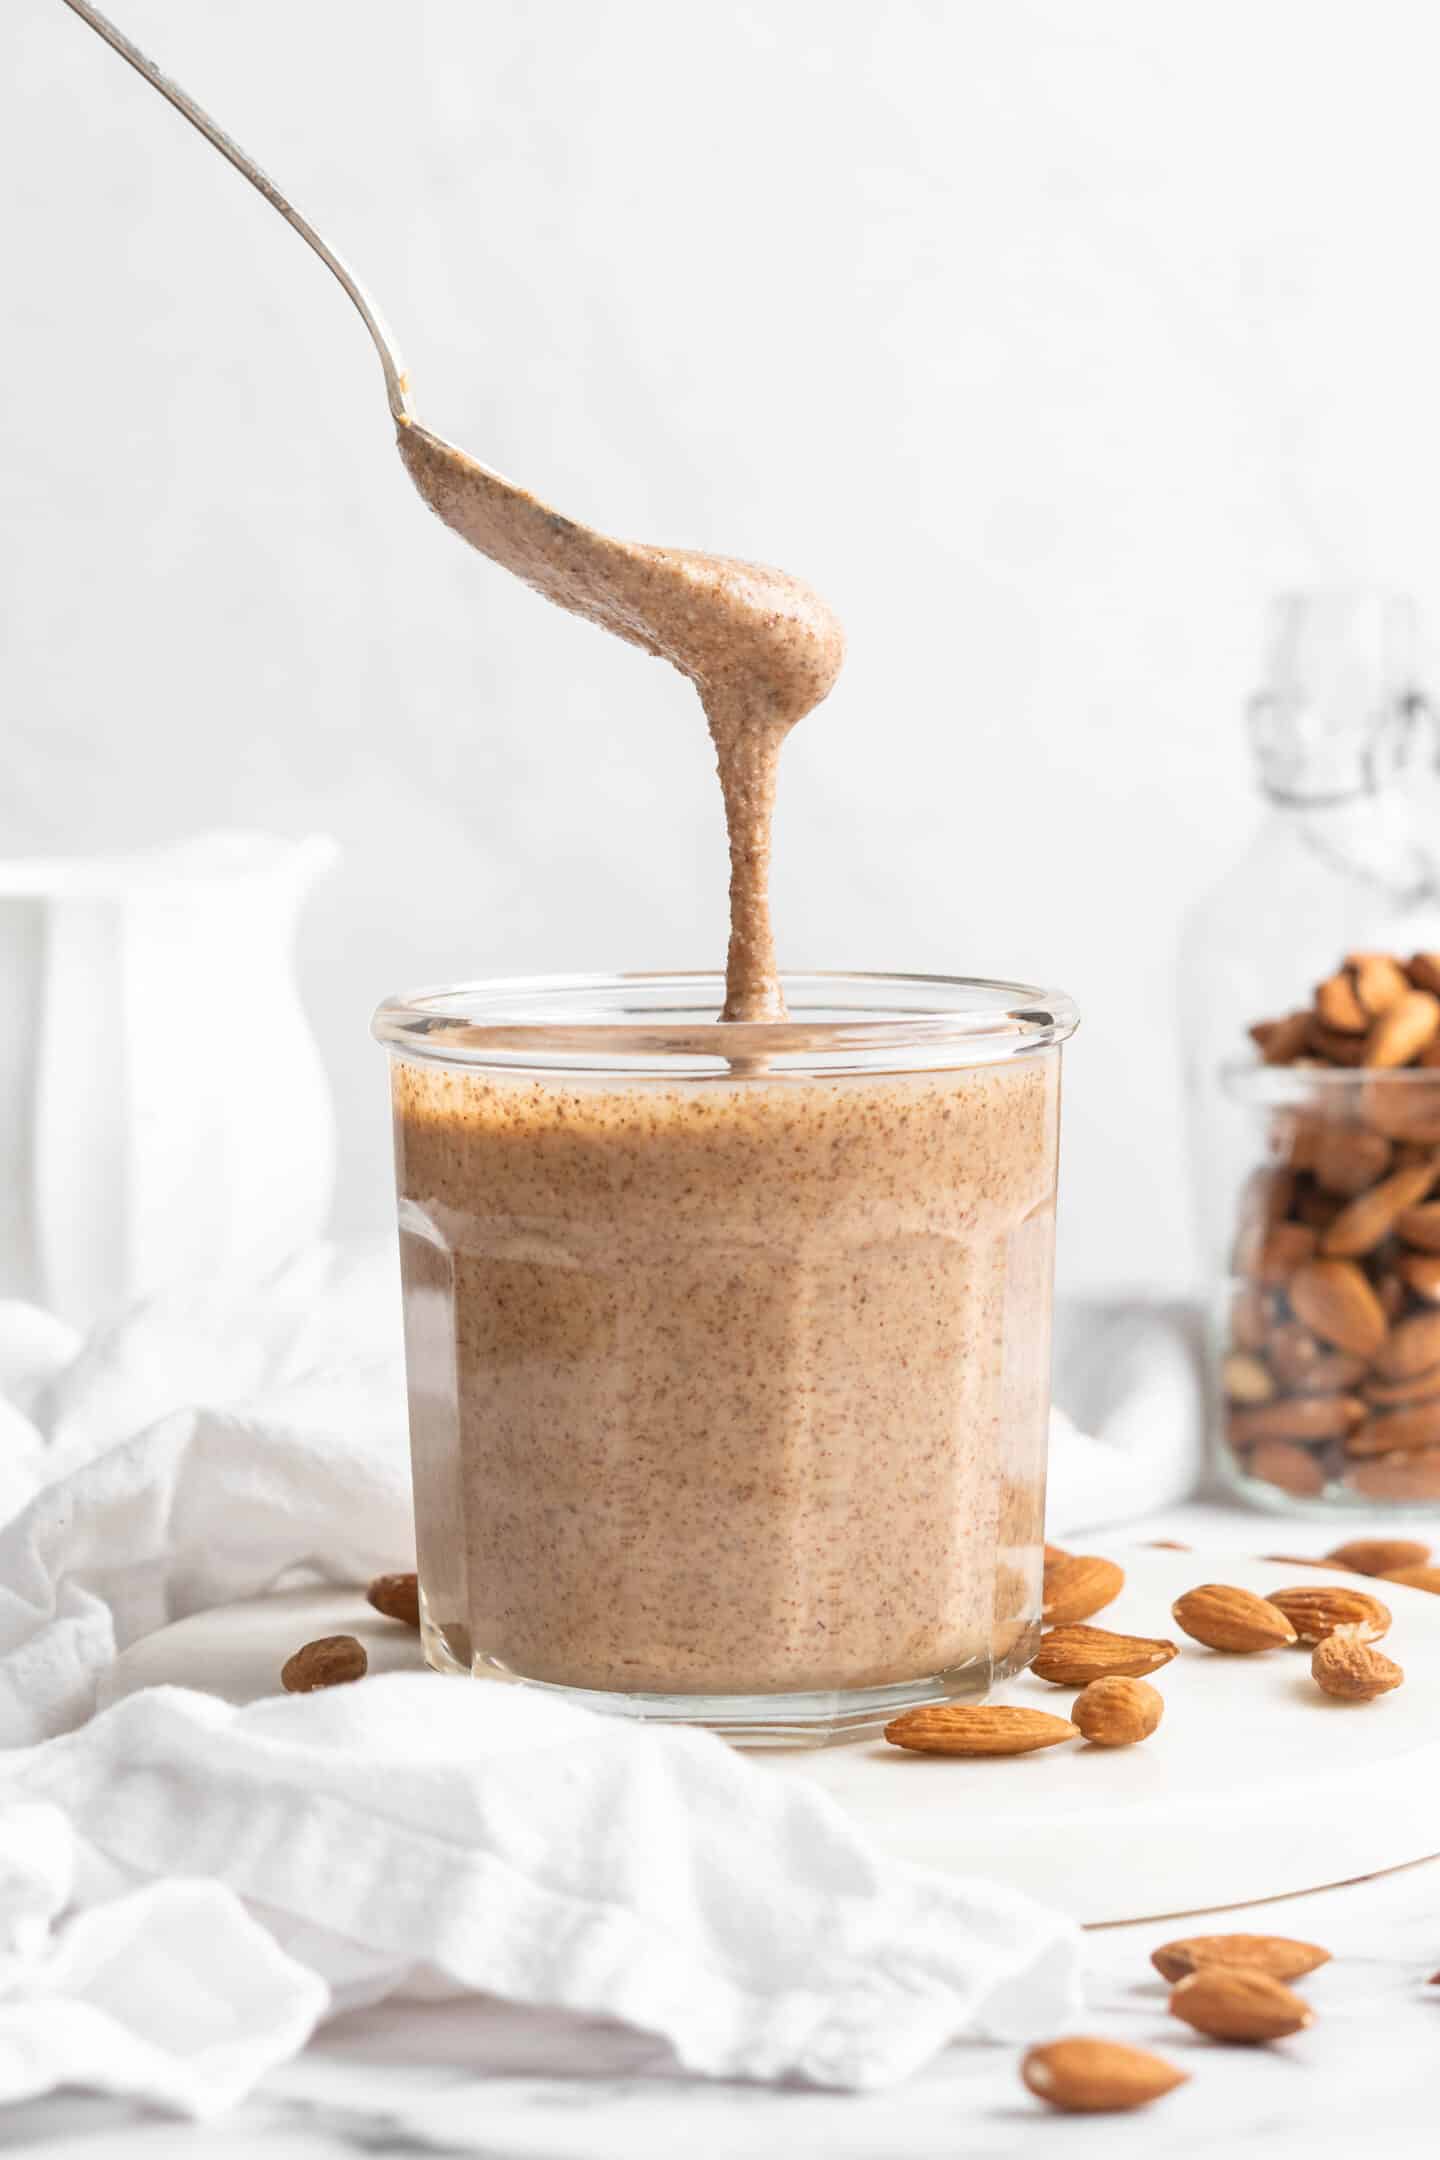 Spoon drizzling almond butter into jar